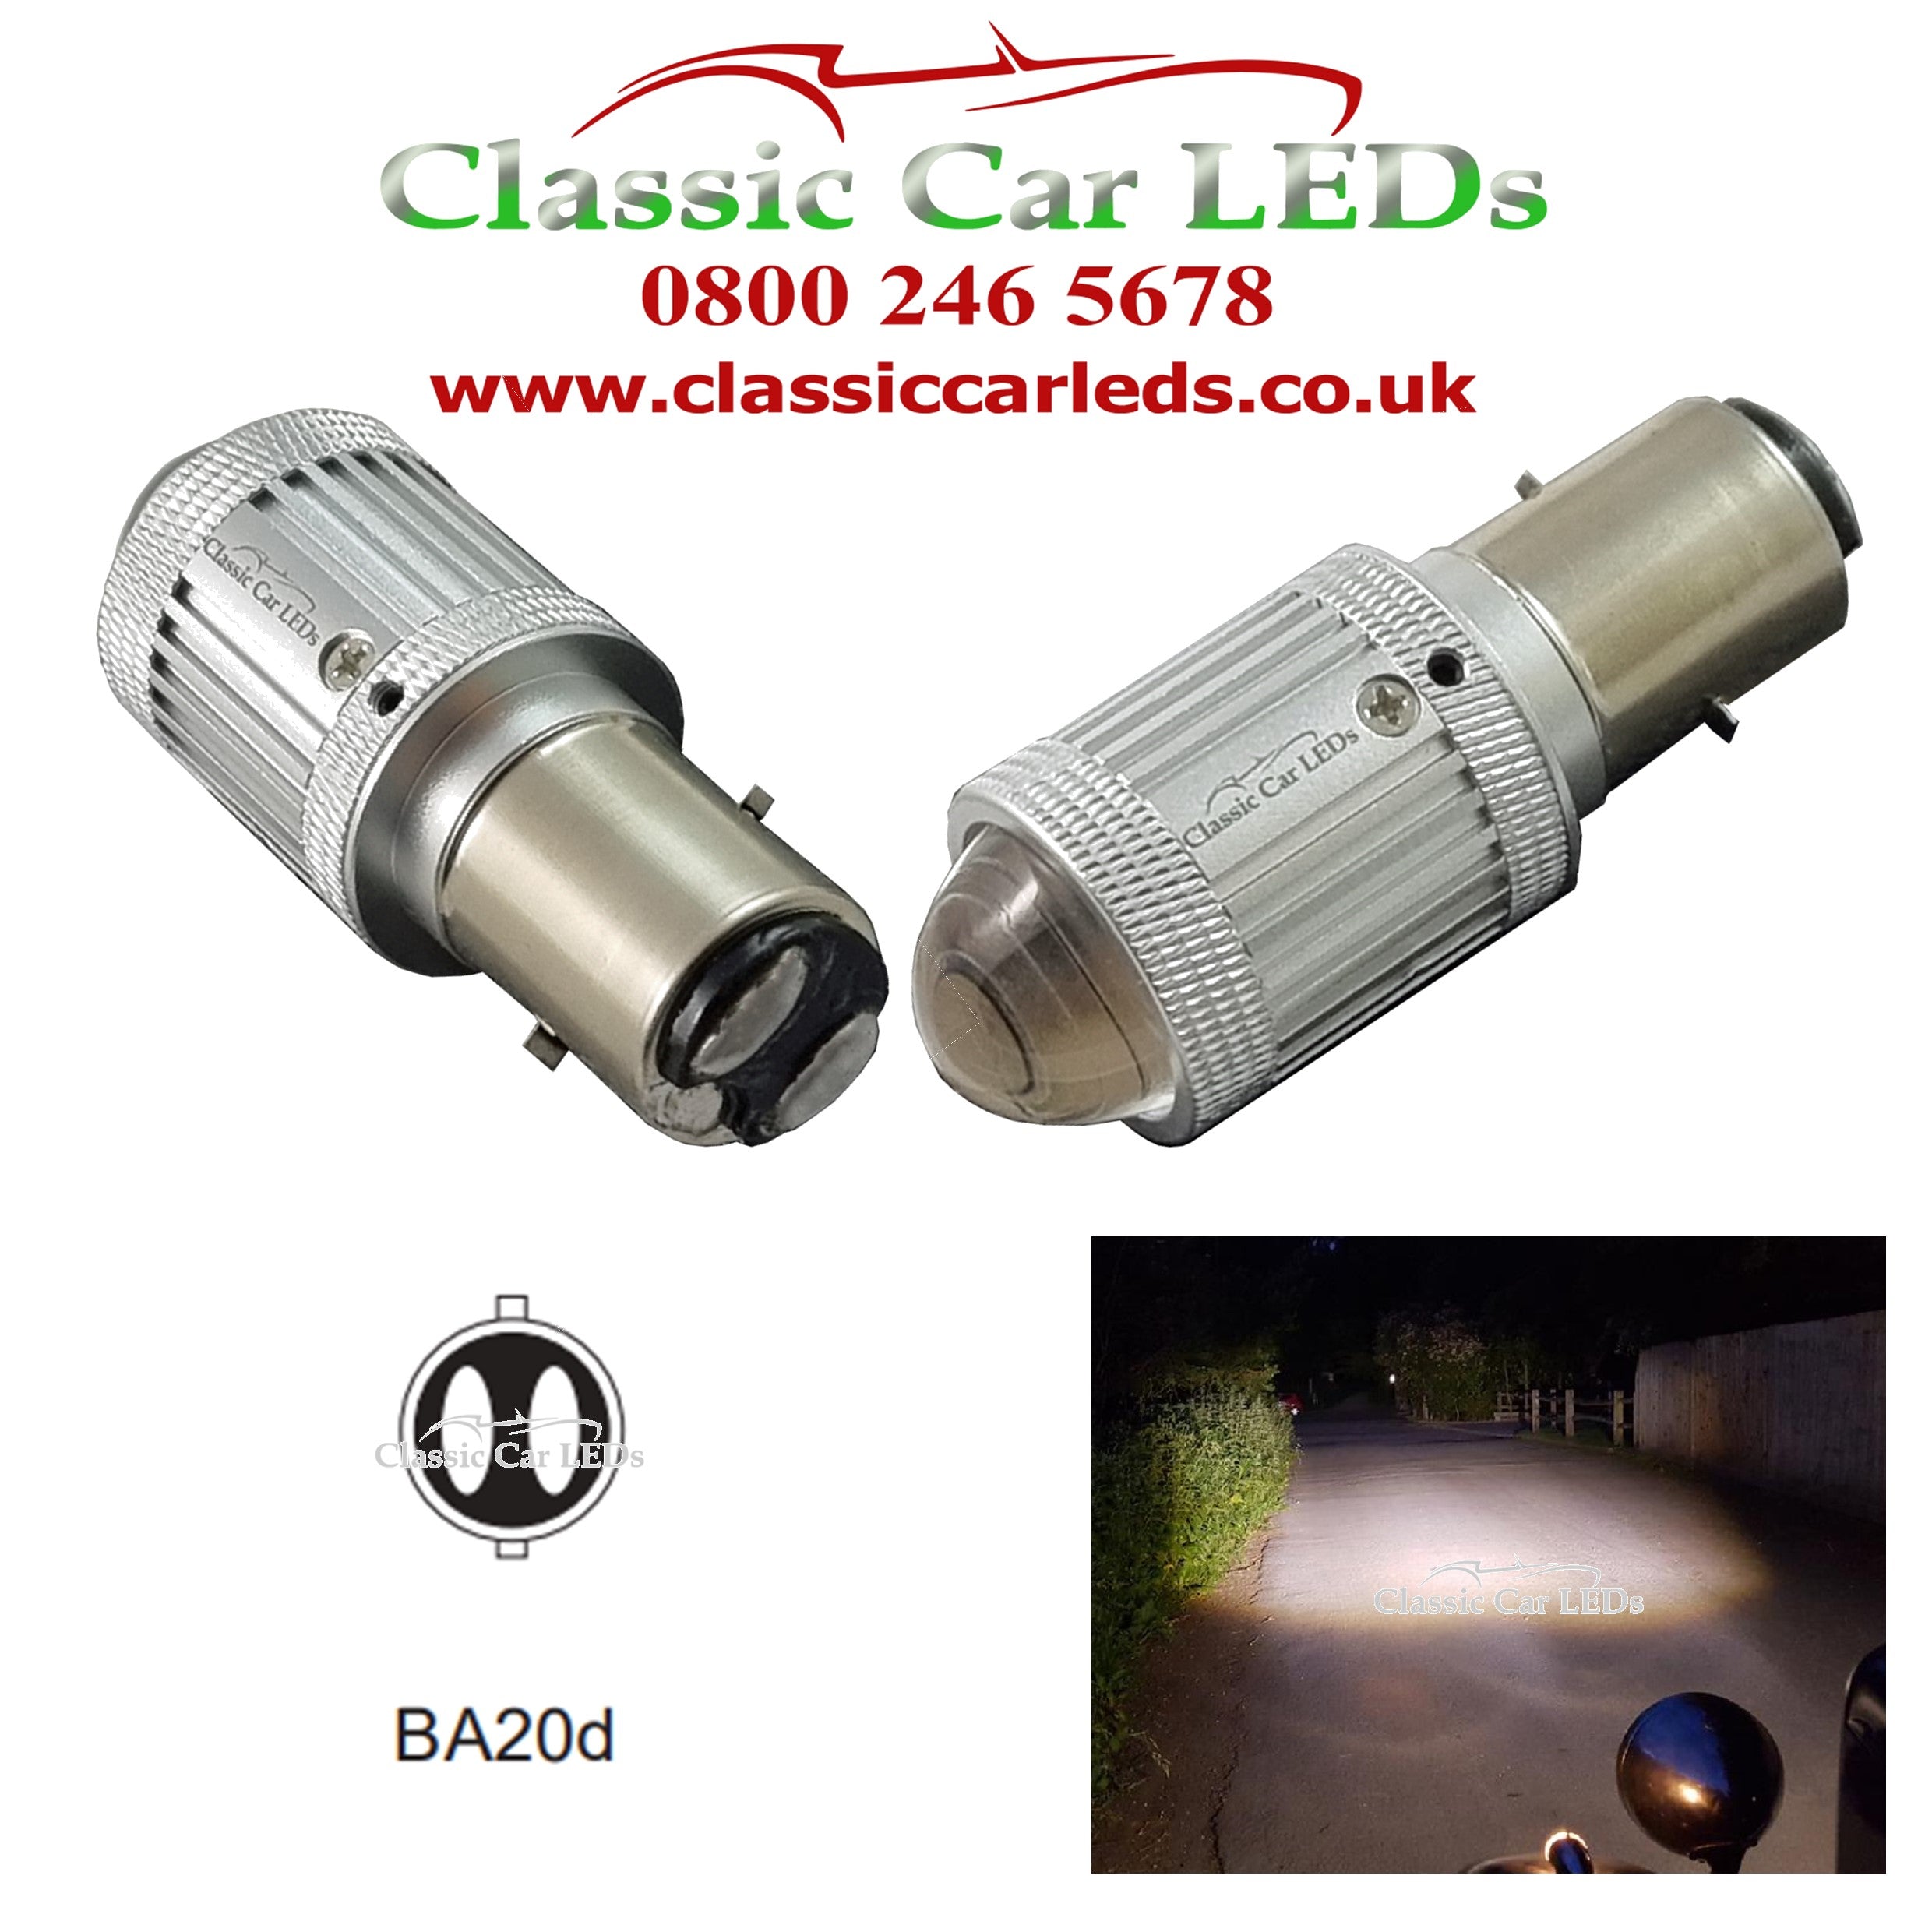 BA20D LED Headlight Upgrade 1047, 1048, 1052, 392, 393, 394, 6V, 12V and Negative or Positive Earth Great Beam Strength and Pattern – Classic Car LEDs Ltd